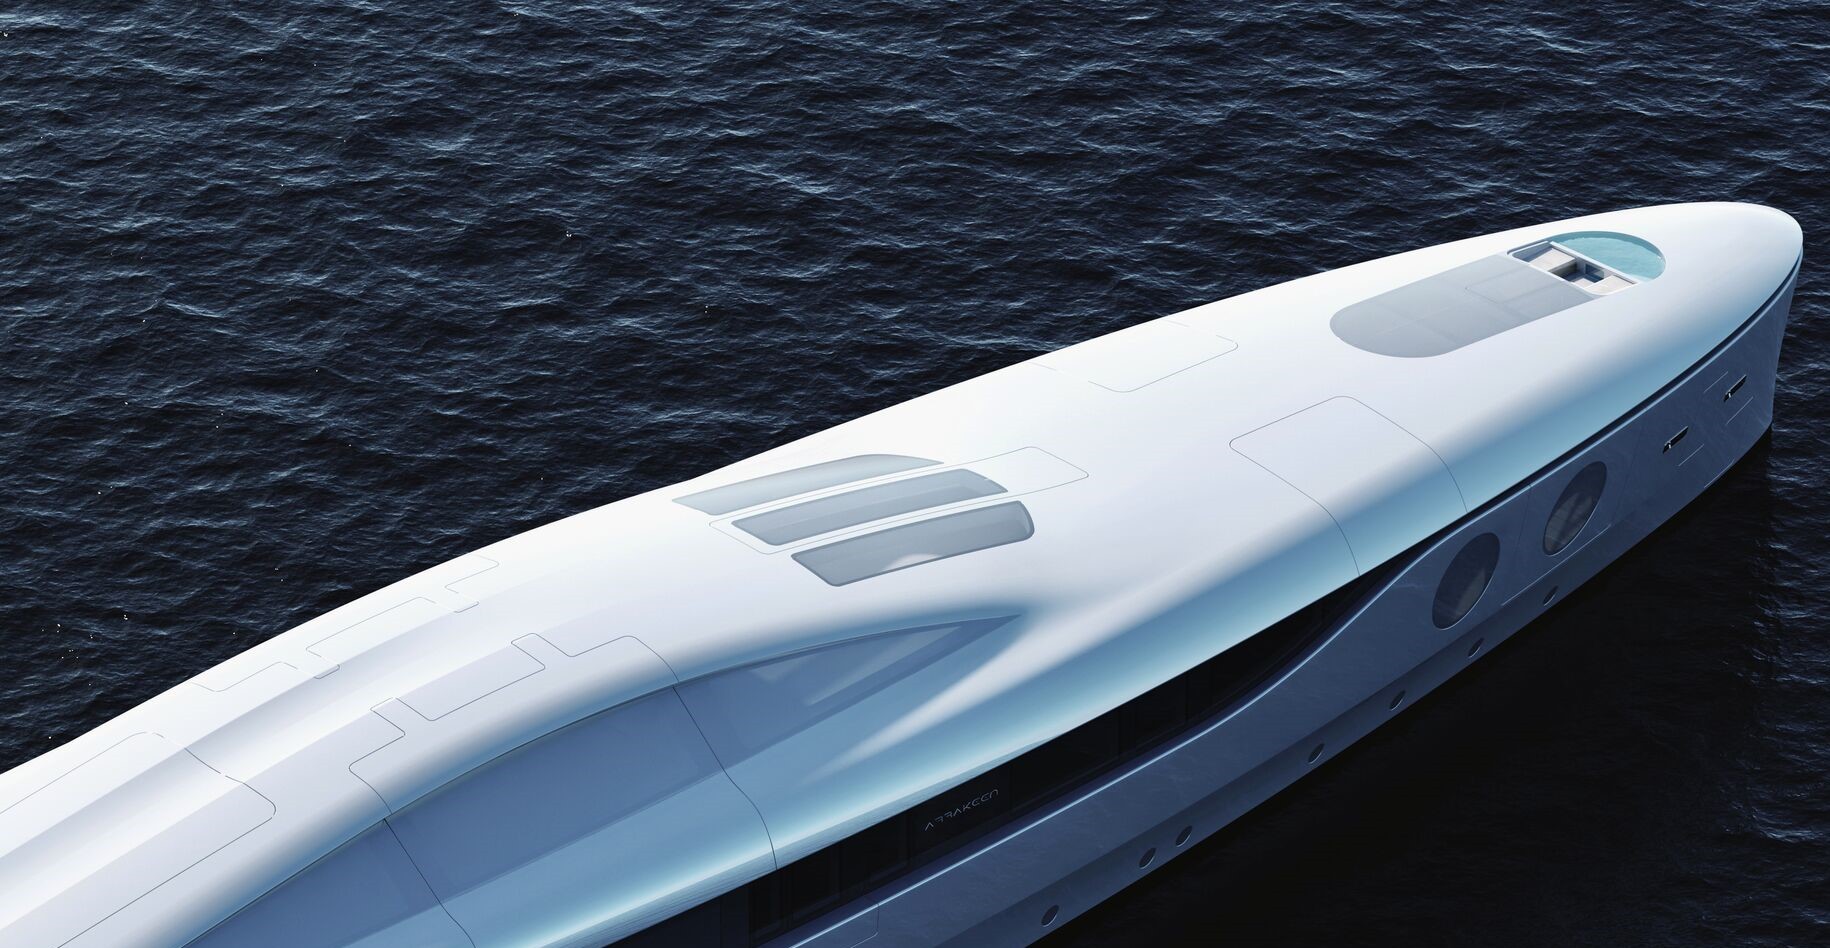 arrakeen is a retrofuturistic superyacht concept with gullwing doors and large portholes 3